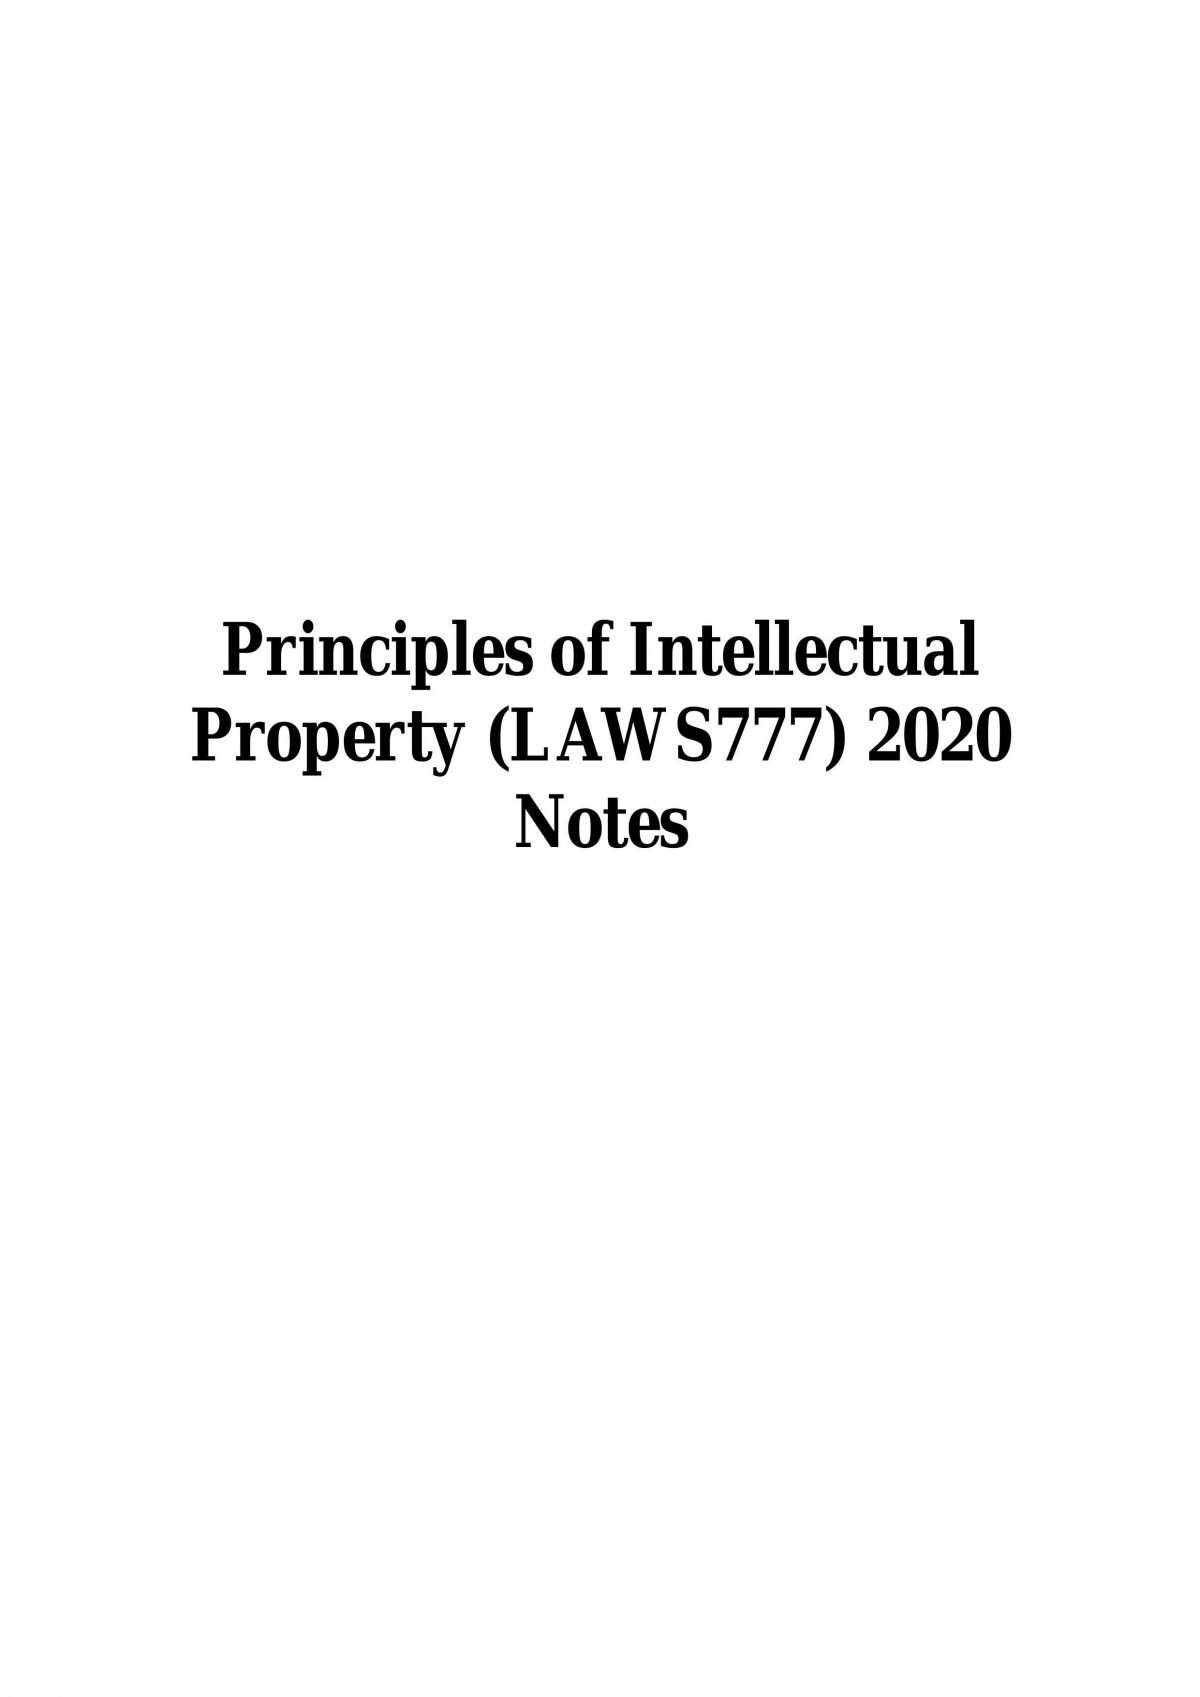 Completed Notes for Principles of Intellectual Property - Page 1